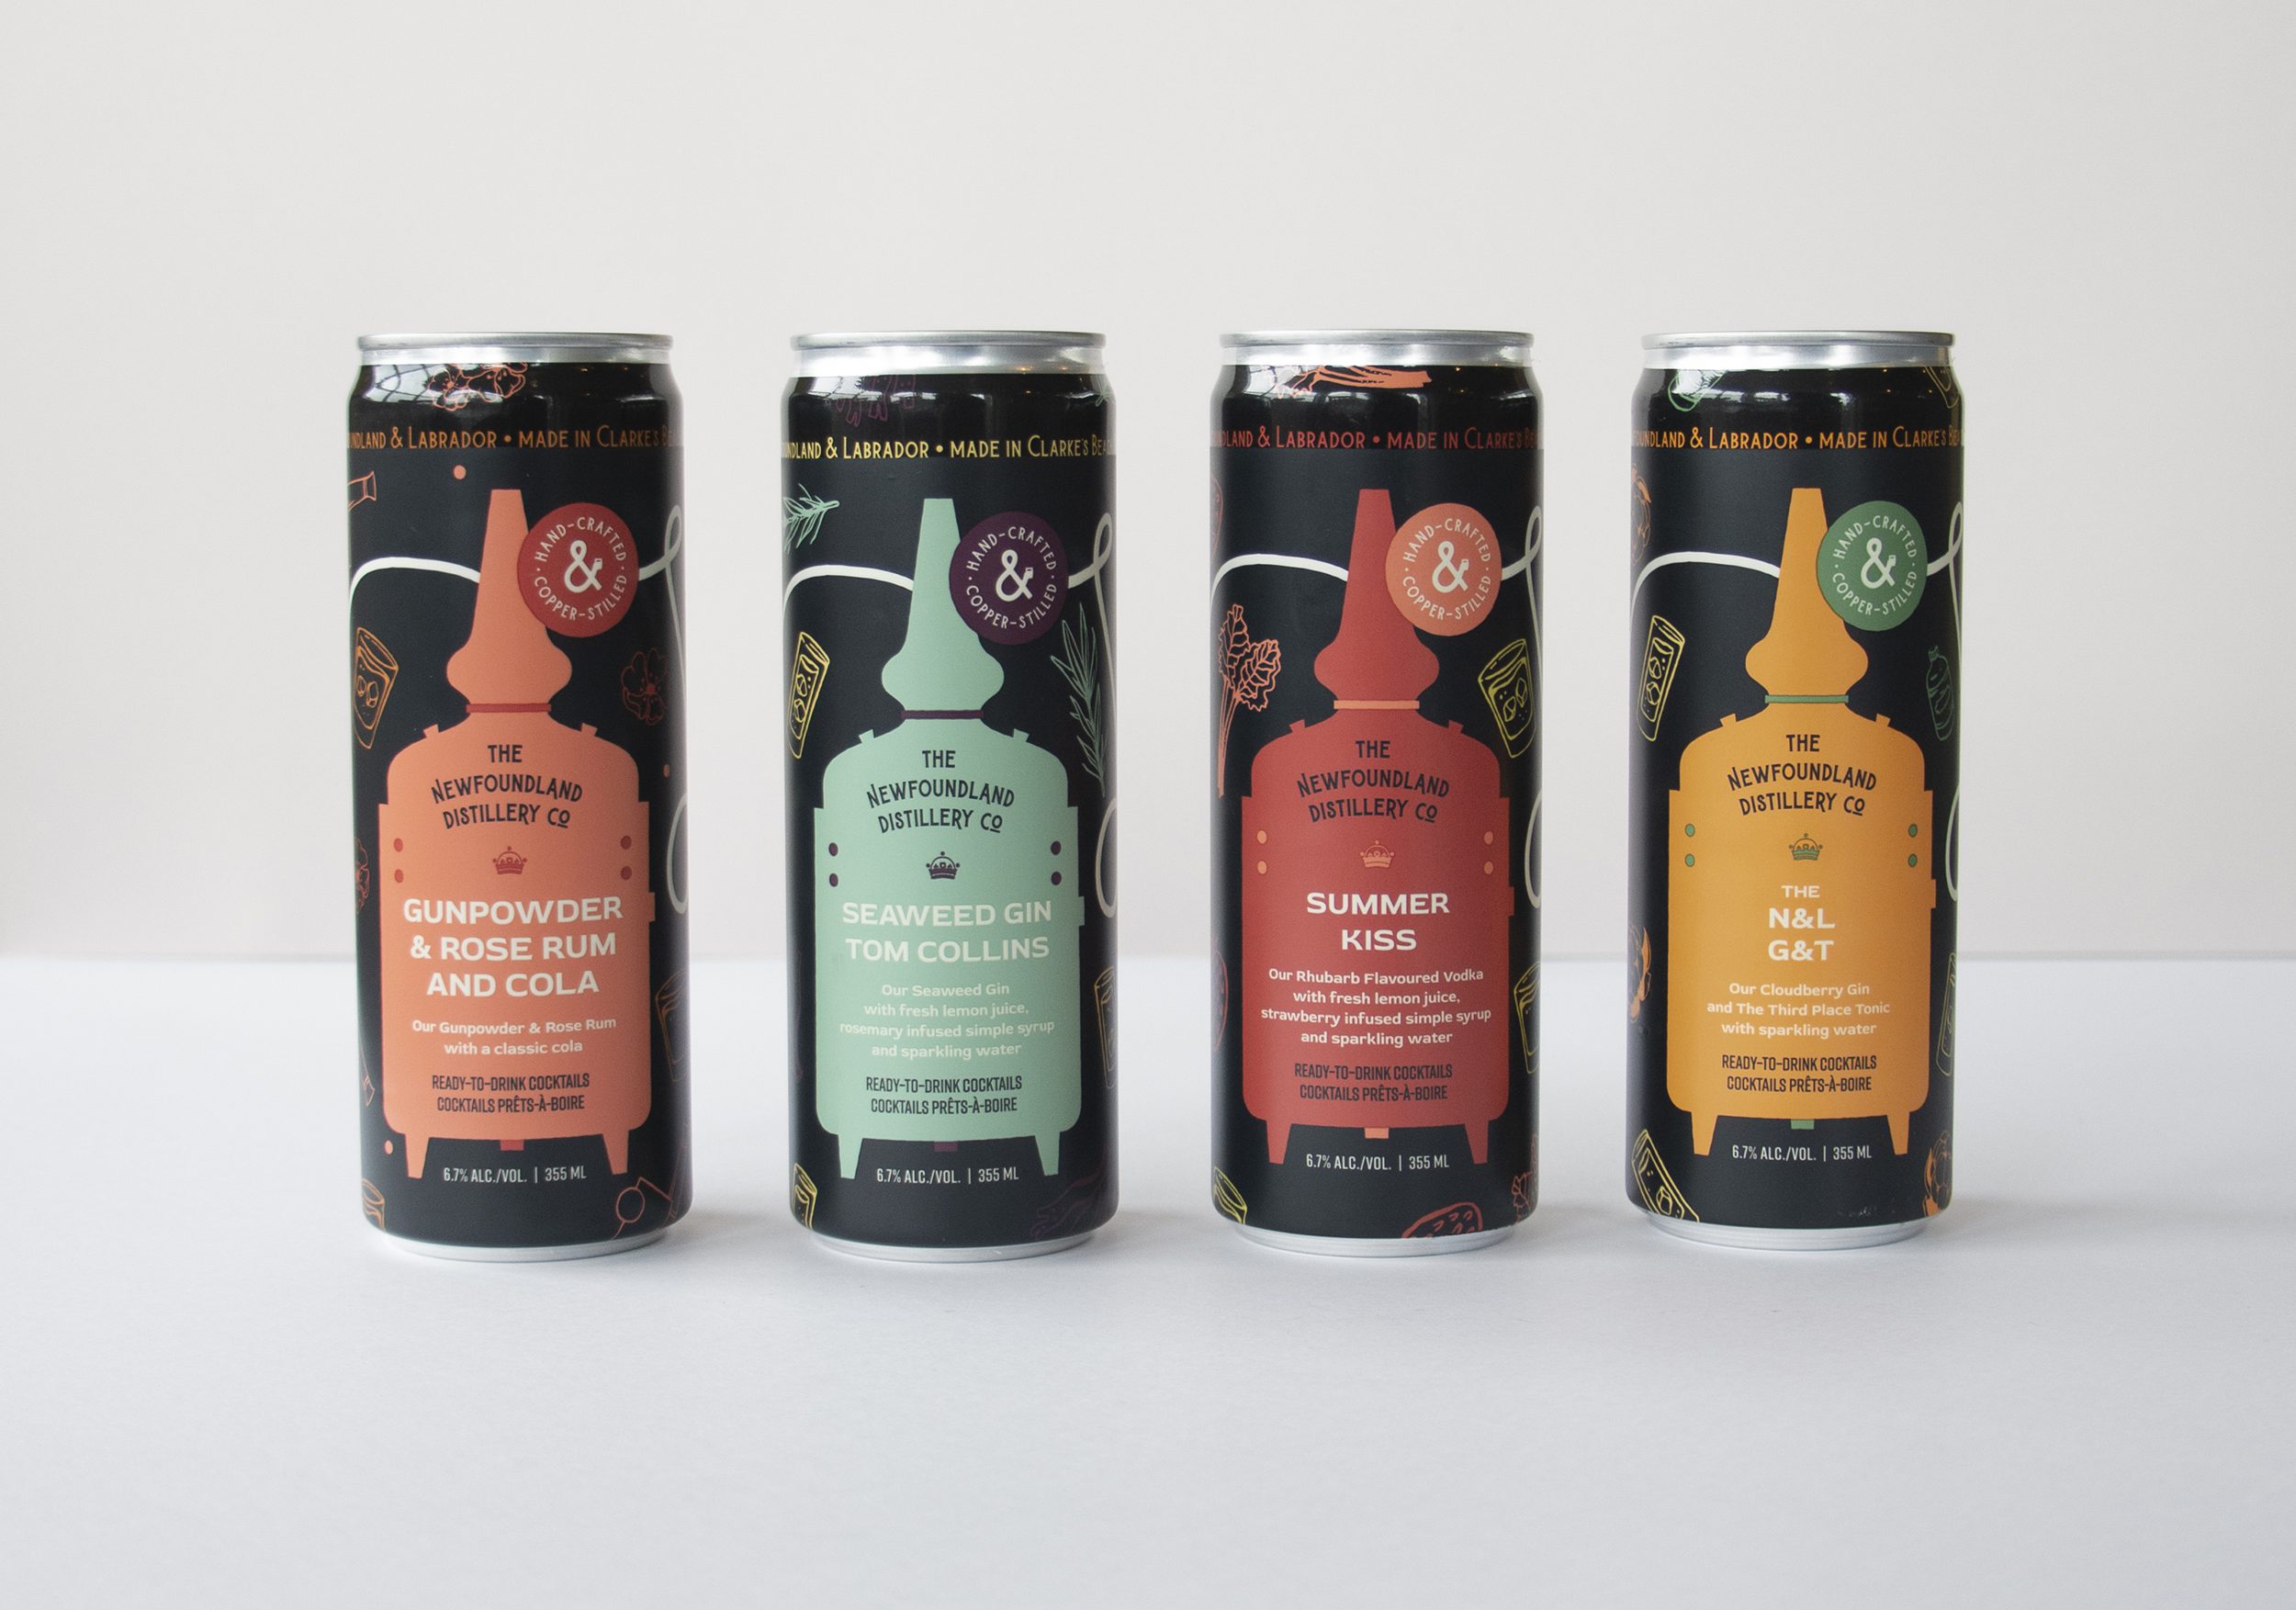 Four different ready-to-drink Newfoundland Distillery Company cocktail cans lined up against a white background